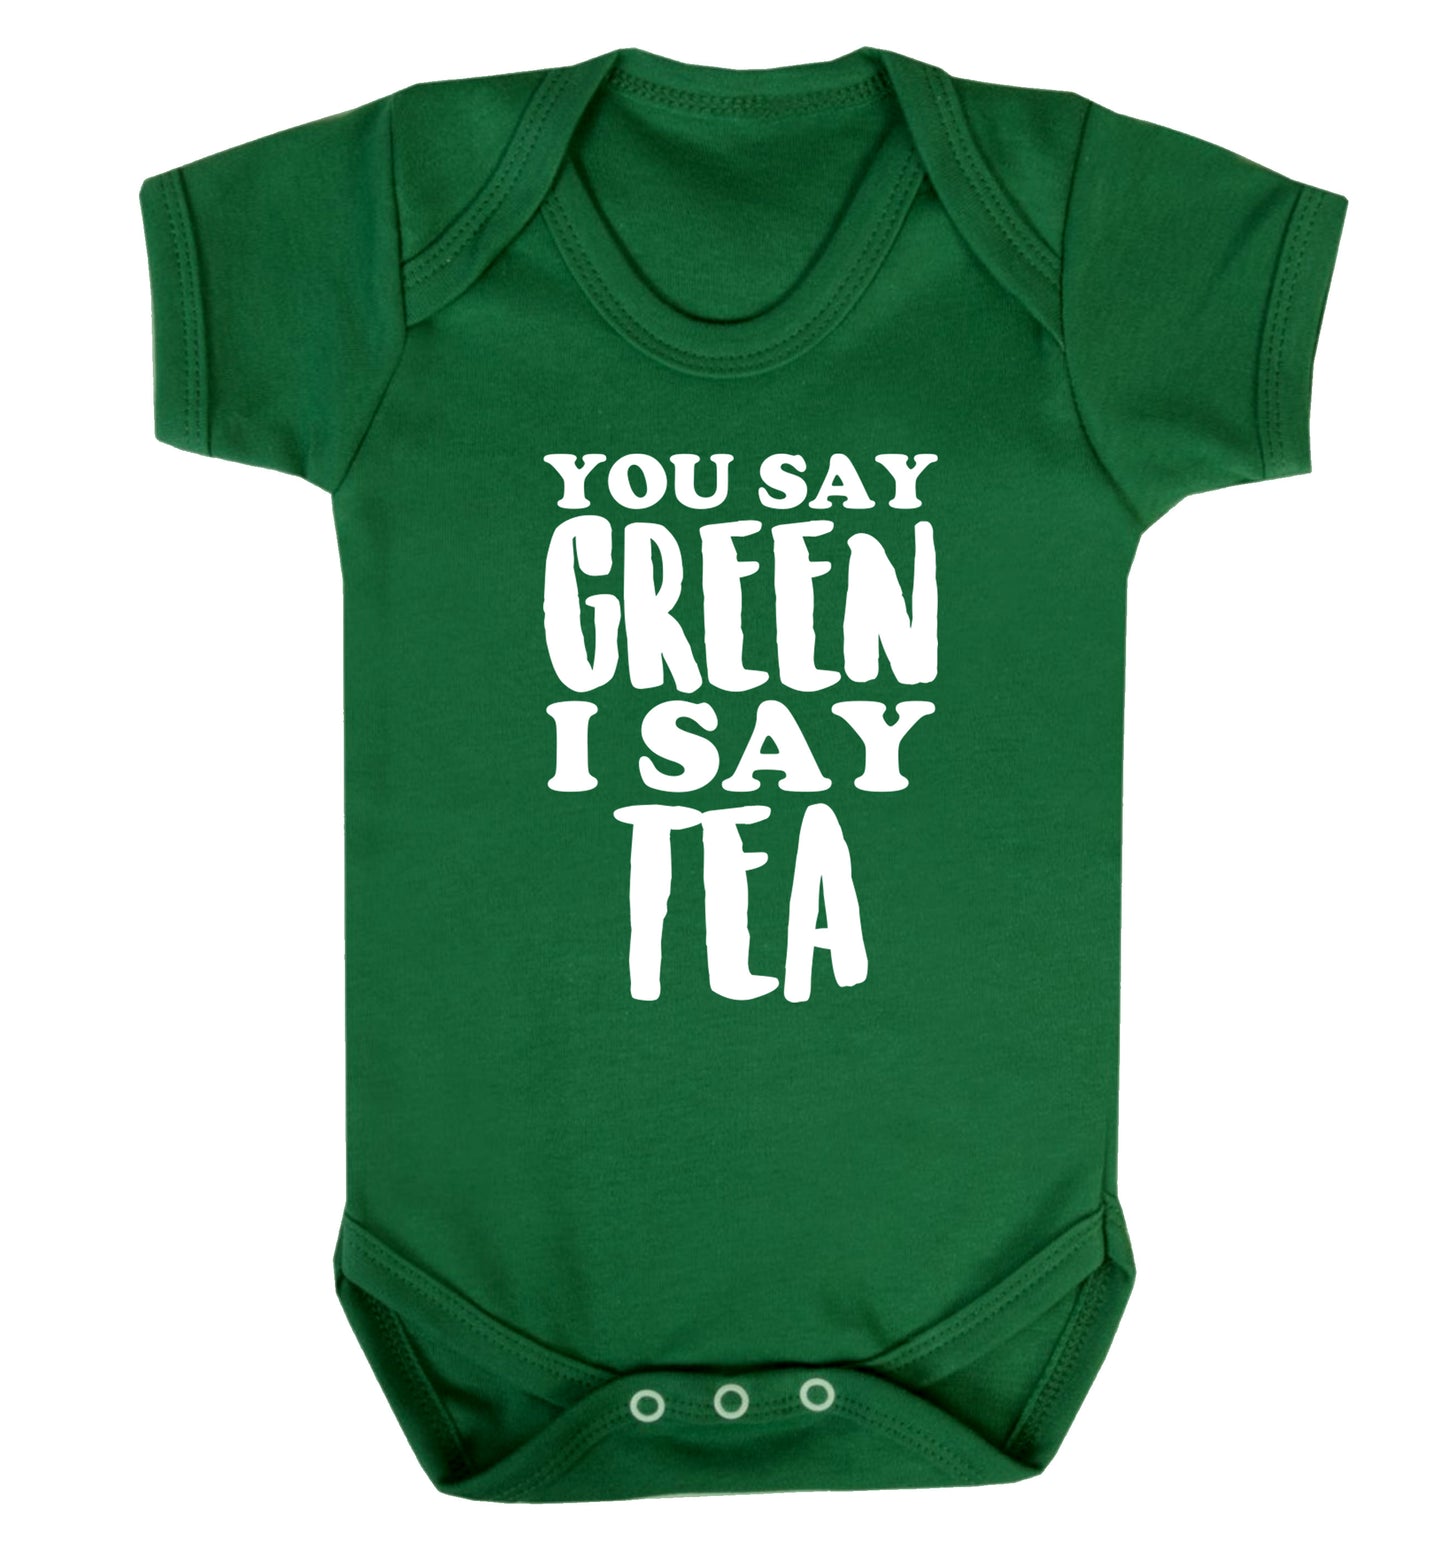 You say green I say tea! Baby Vest green 18-24 months